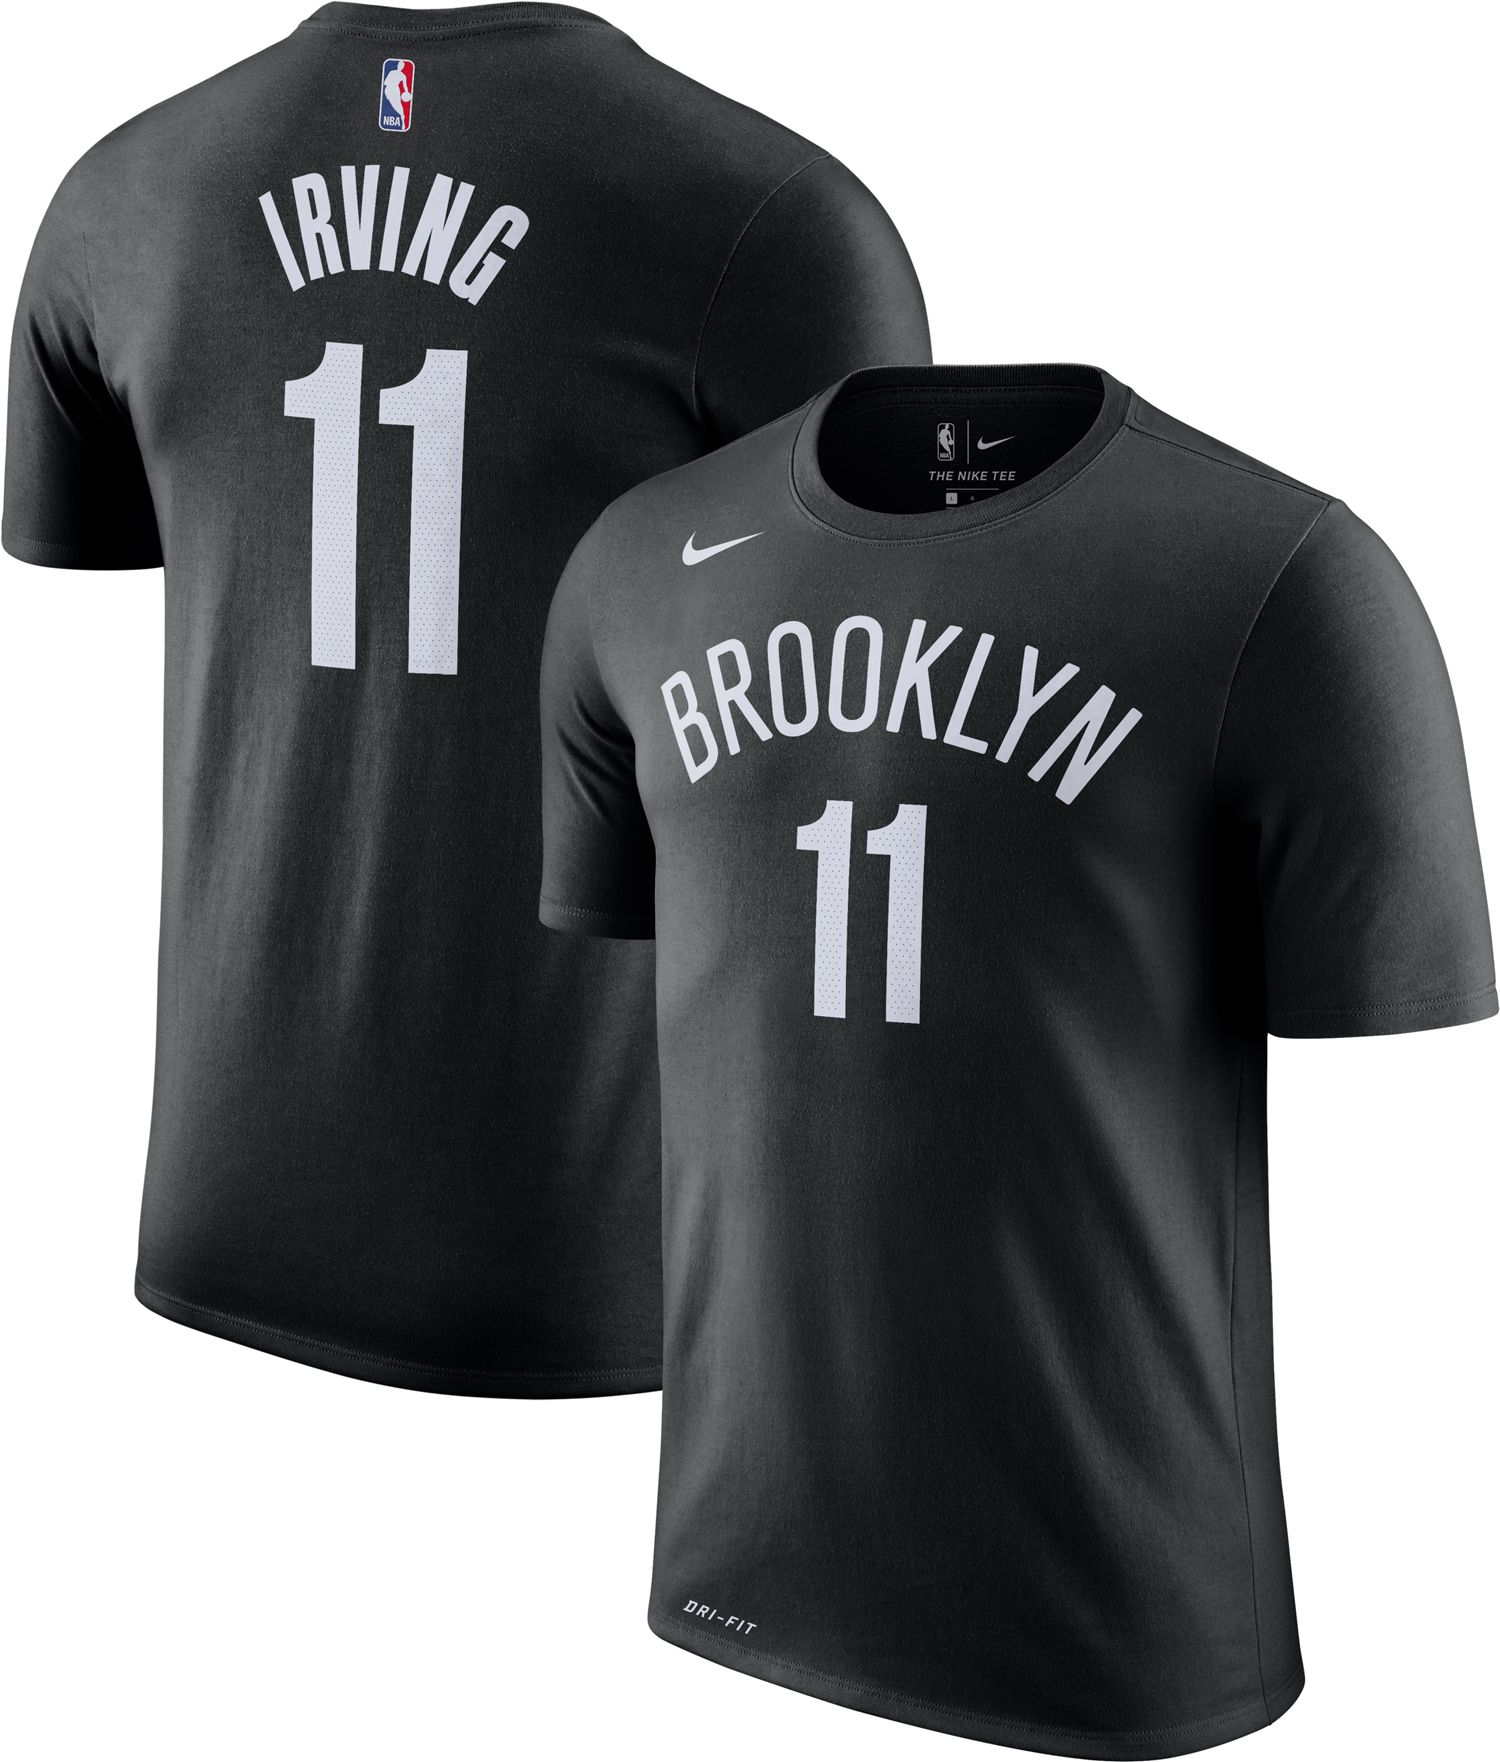 irving jersey youth